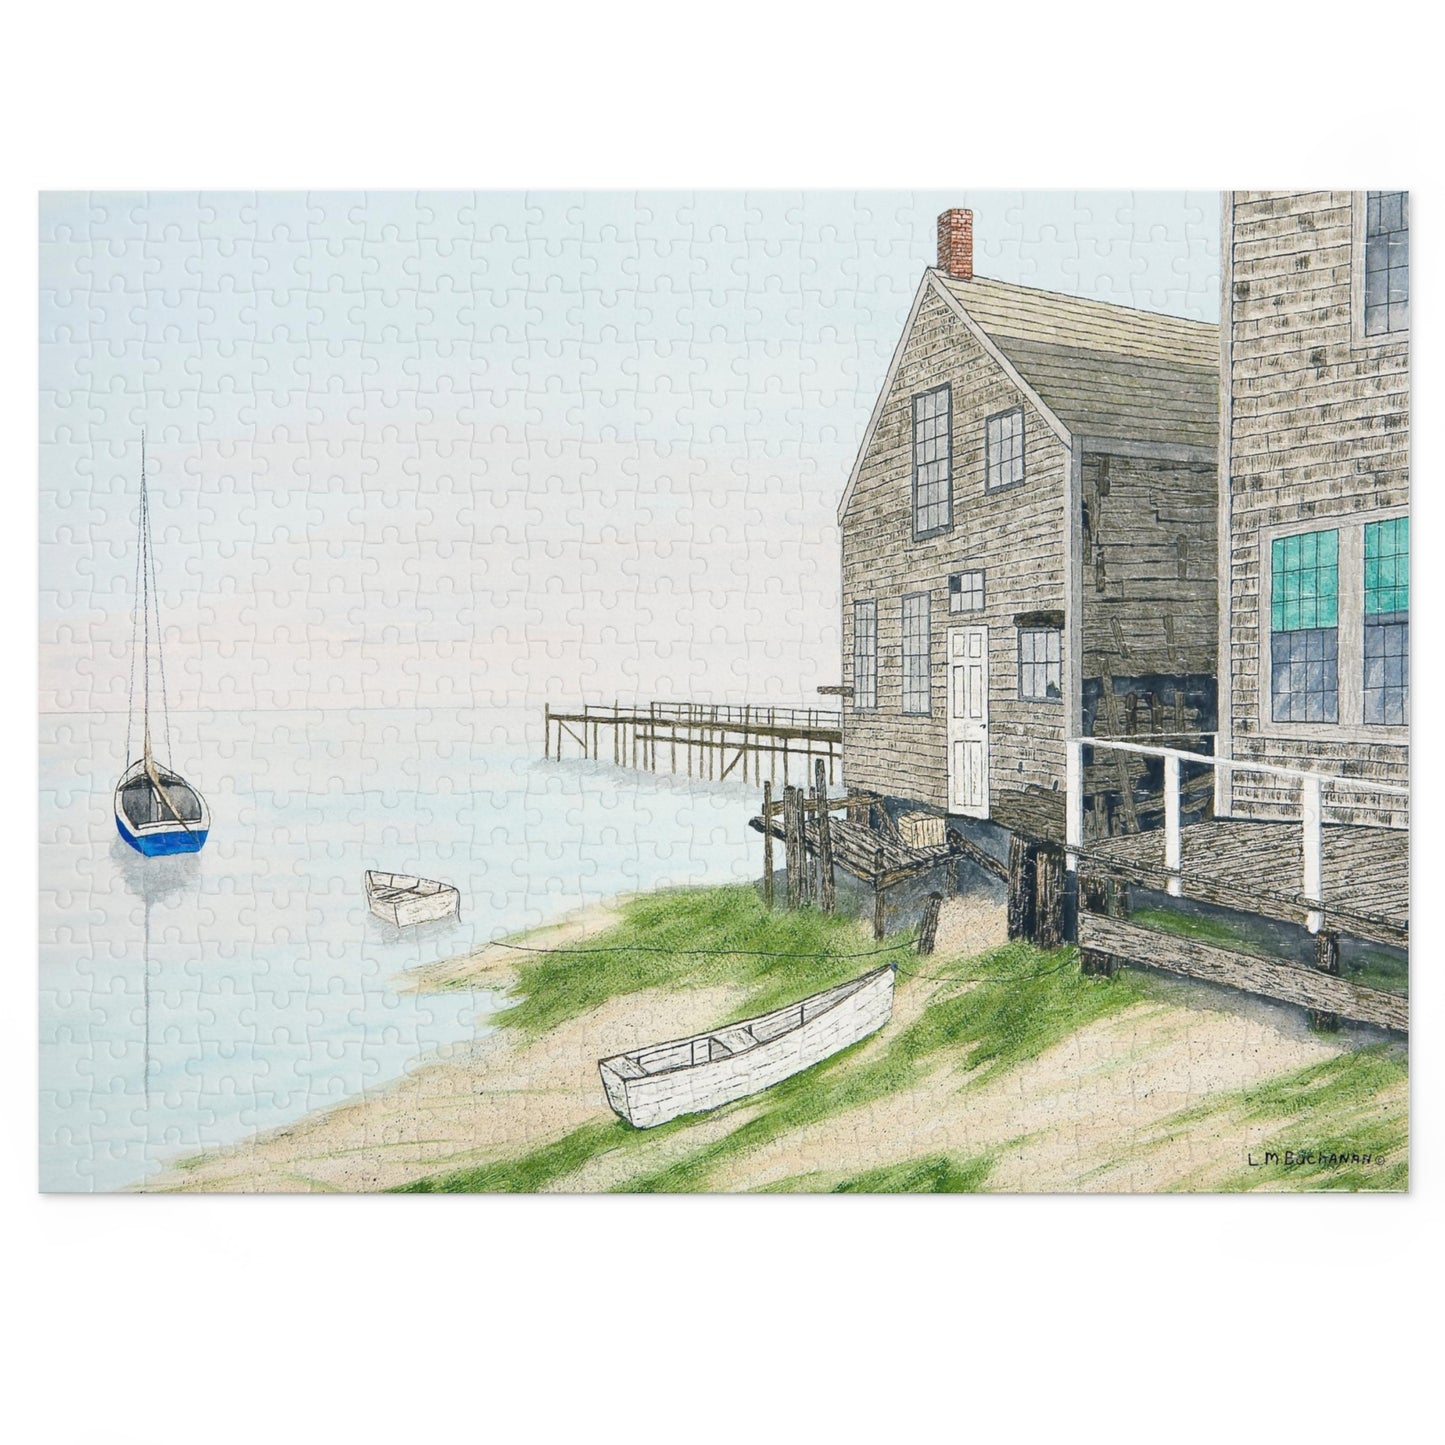 The Low Tide image is a reproduction of a watercolor by artist Lee M. Buchanan. Nantucket Island is full of charm, and  this scene conveys its beauty and tranquility. This painting is the artist's vision of a scene at the bay. 